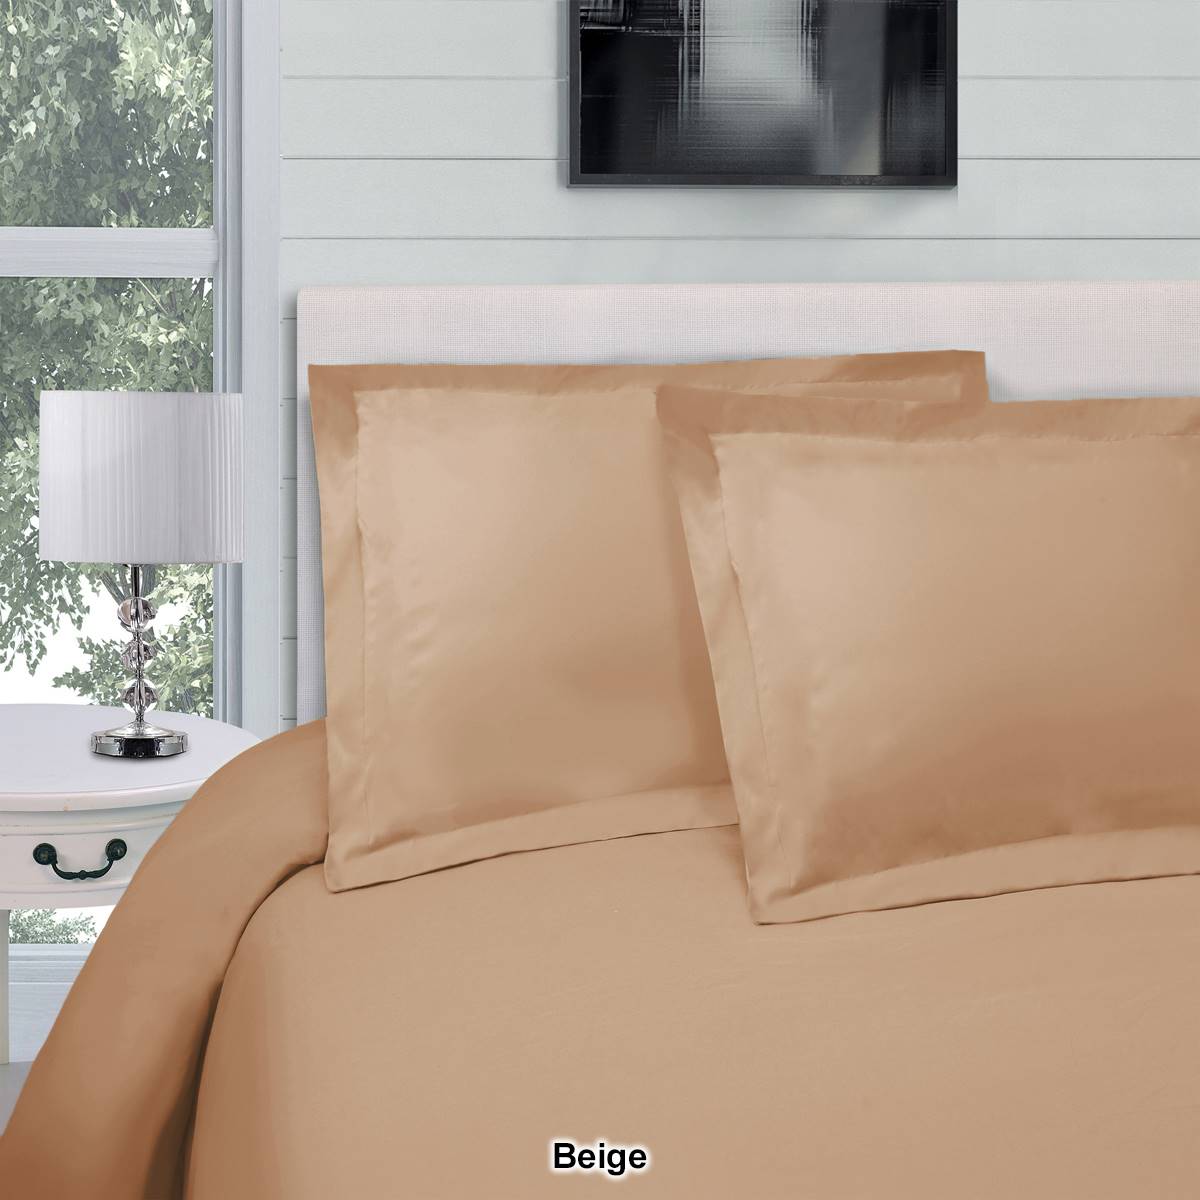 Superior 300 Thread Count Solid Egyptian Cotton Duvet Cover Set